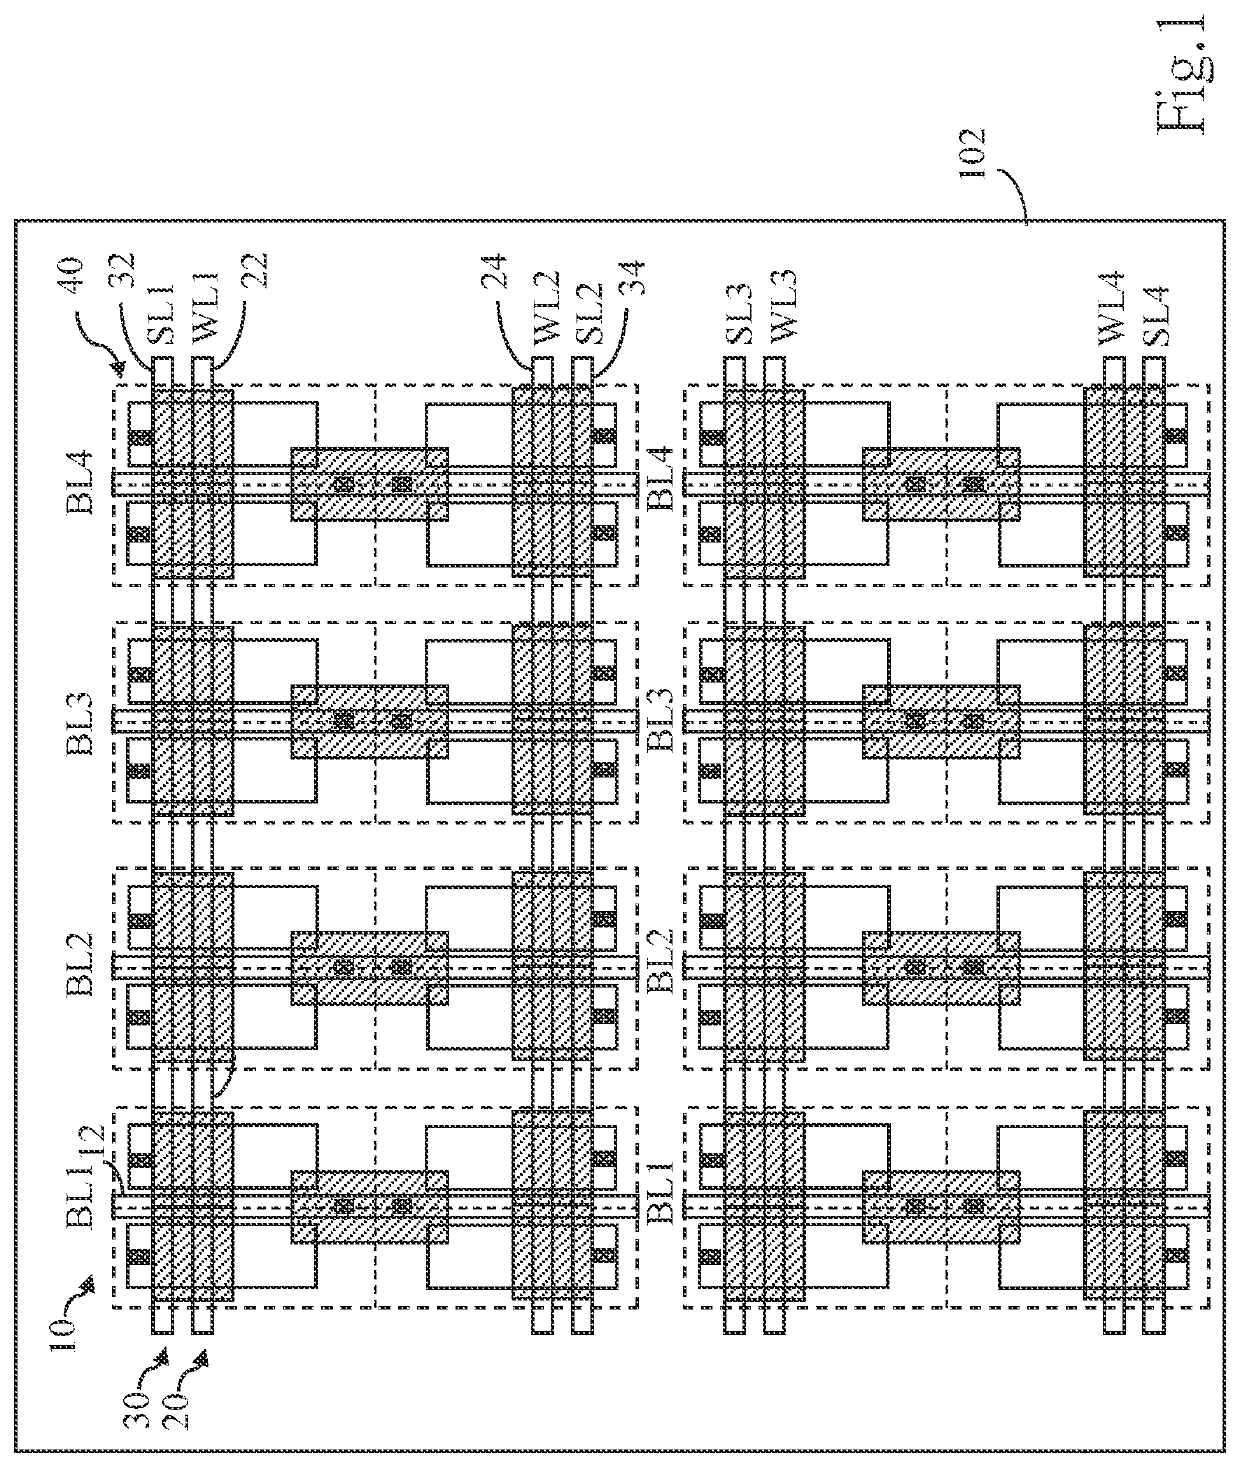 Small-area and low-voltage Anti-fuse element and array